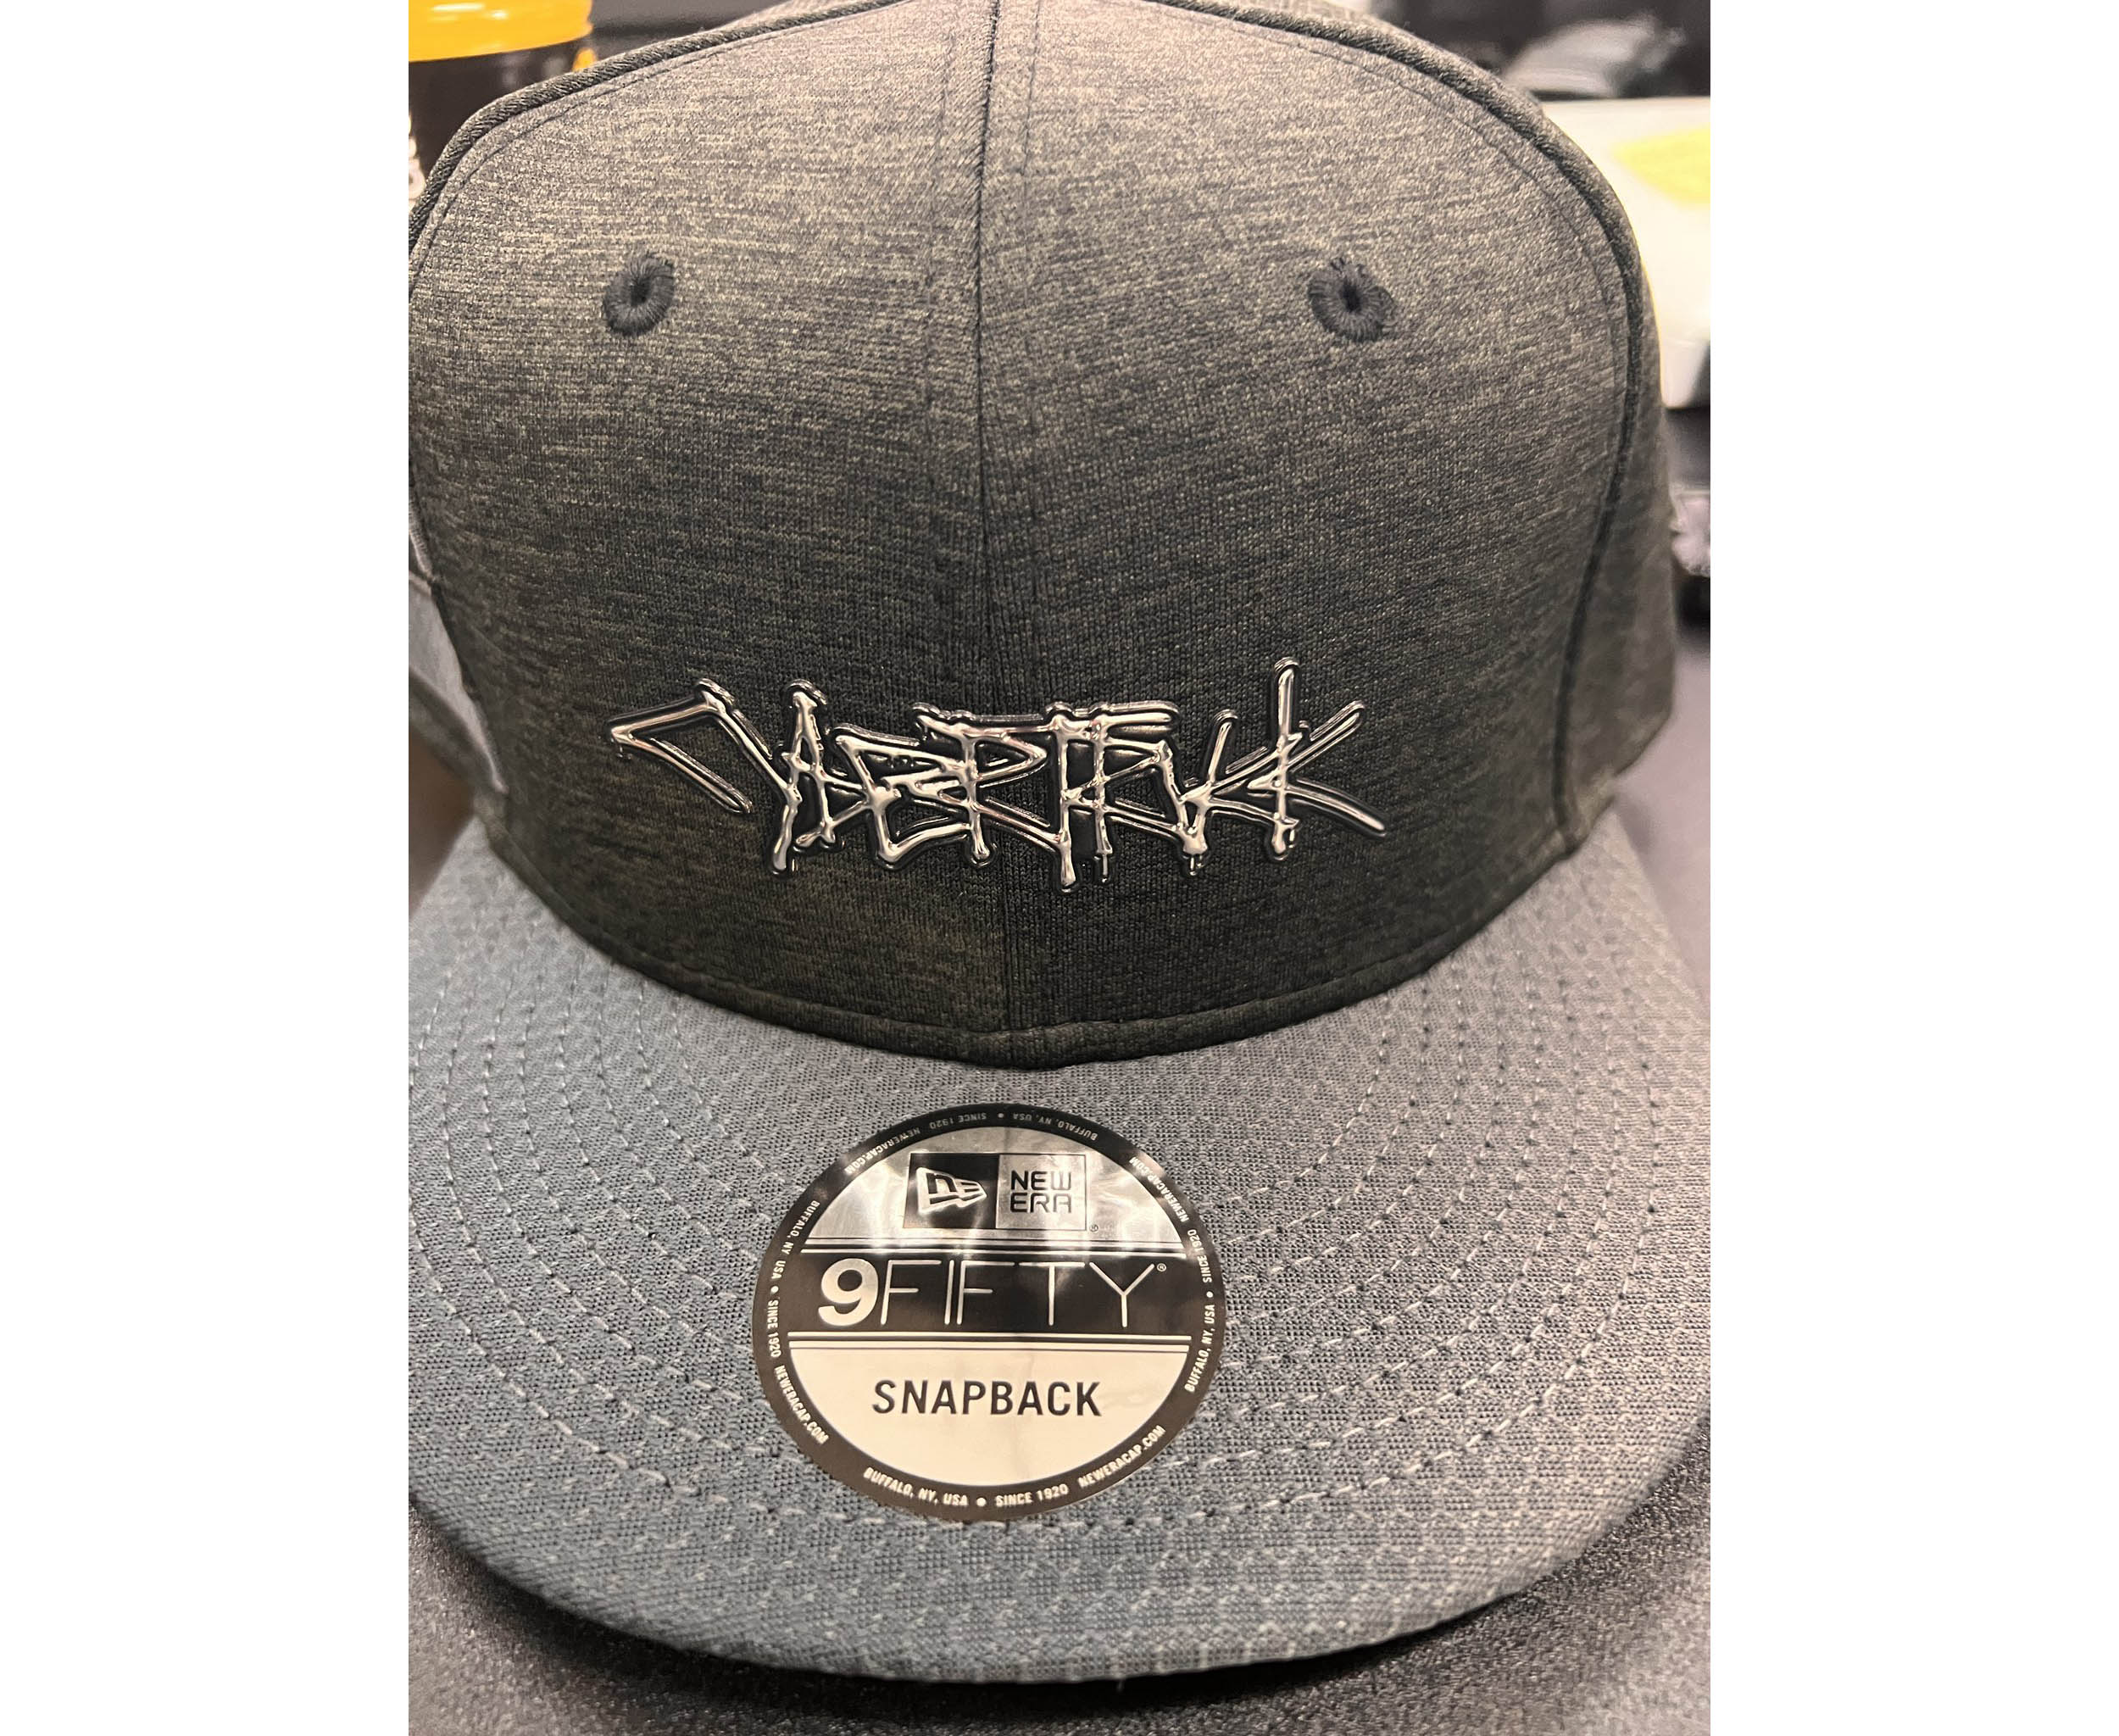 Cool new Cybertruck hat / cap (by New Era) being given out at Tesla ...